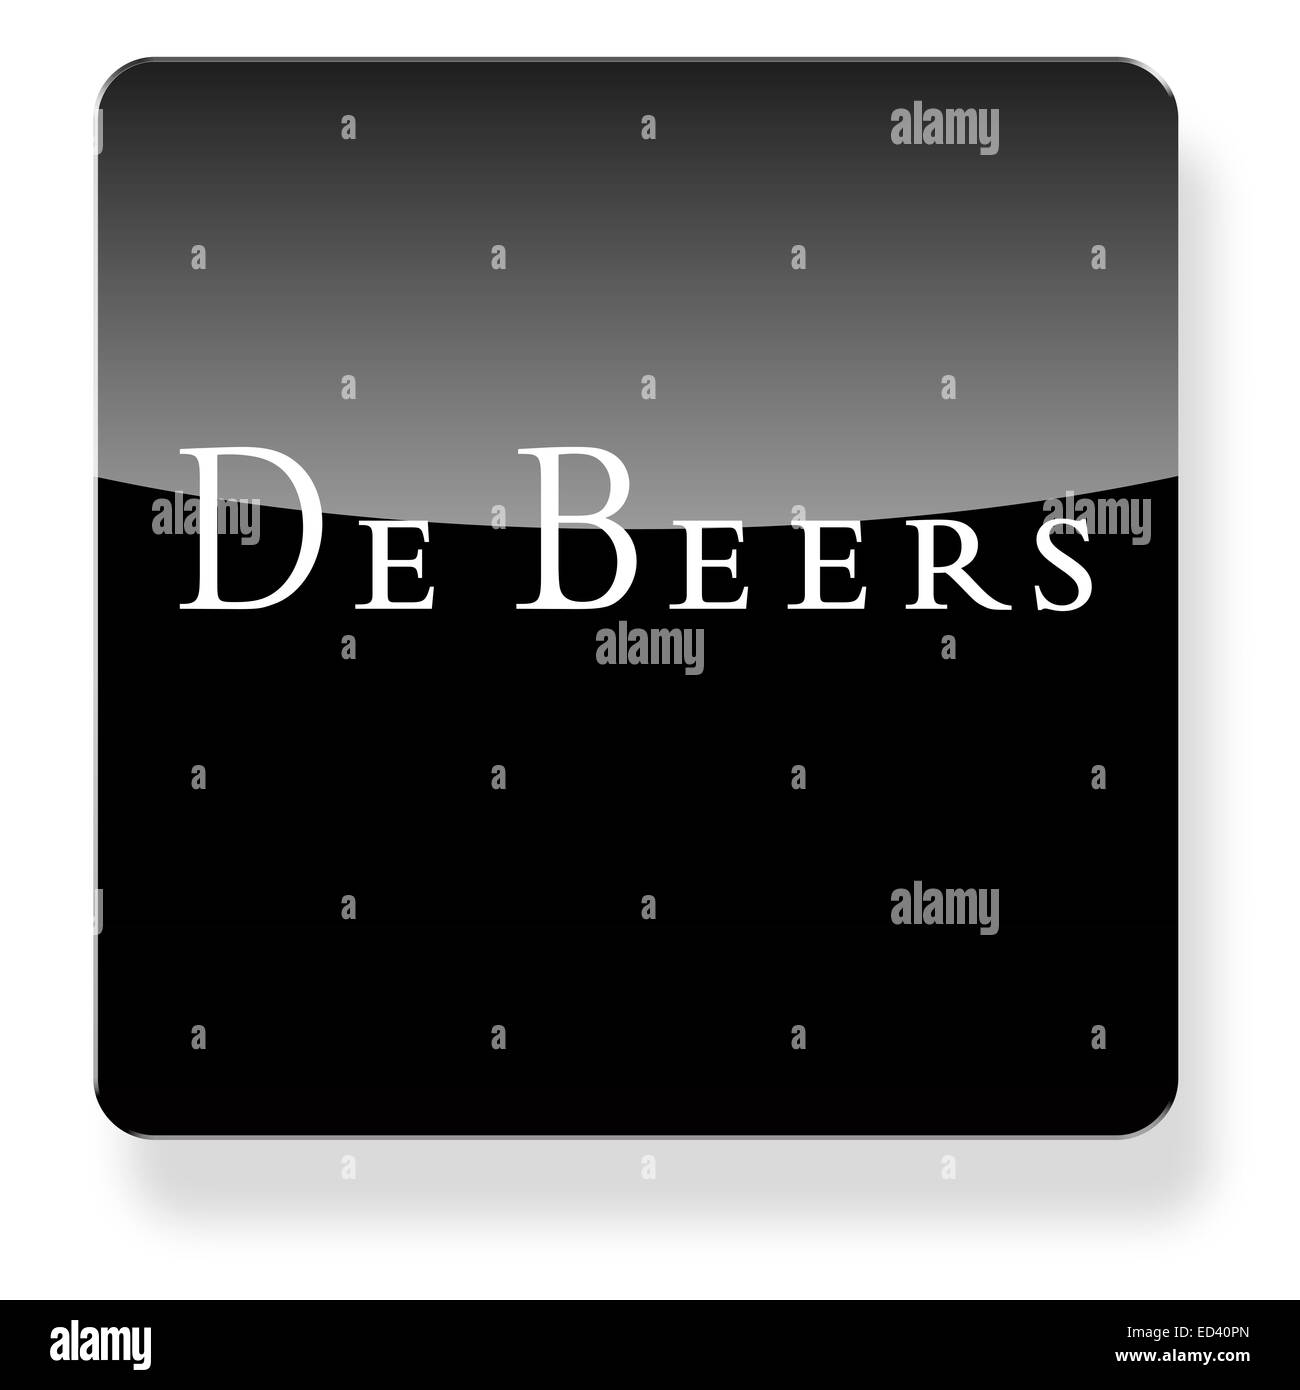 Debeers logo Cut Out Stock Images & Pictures - Alamy